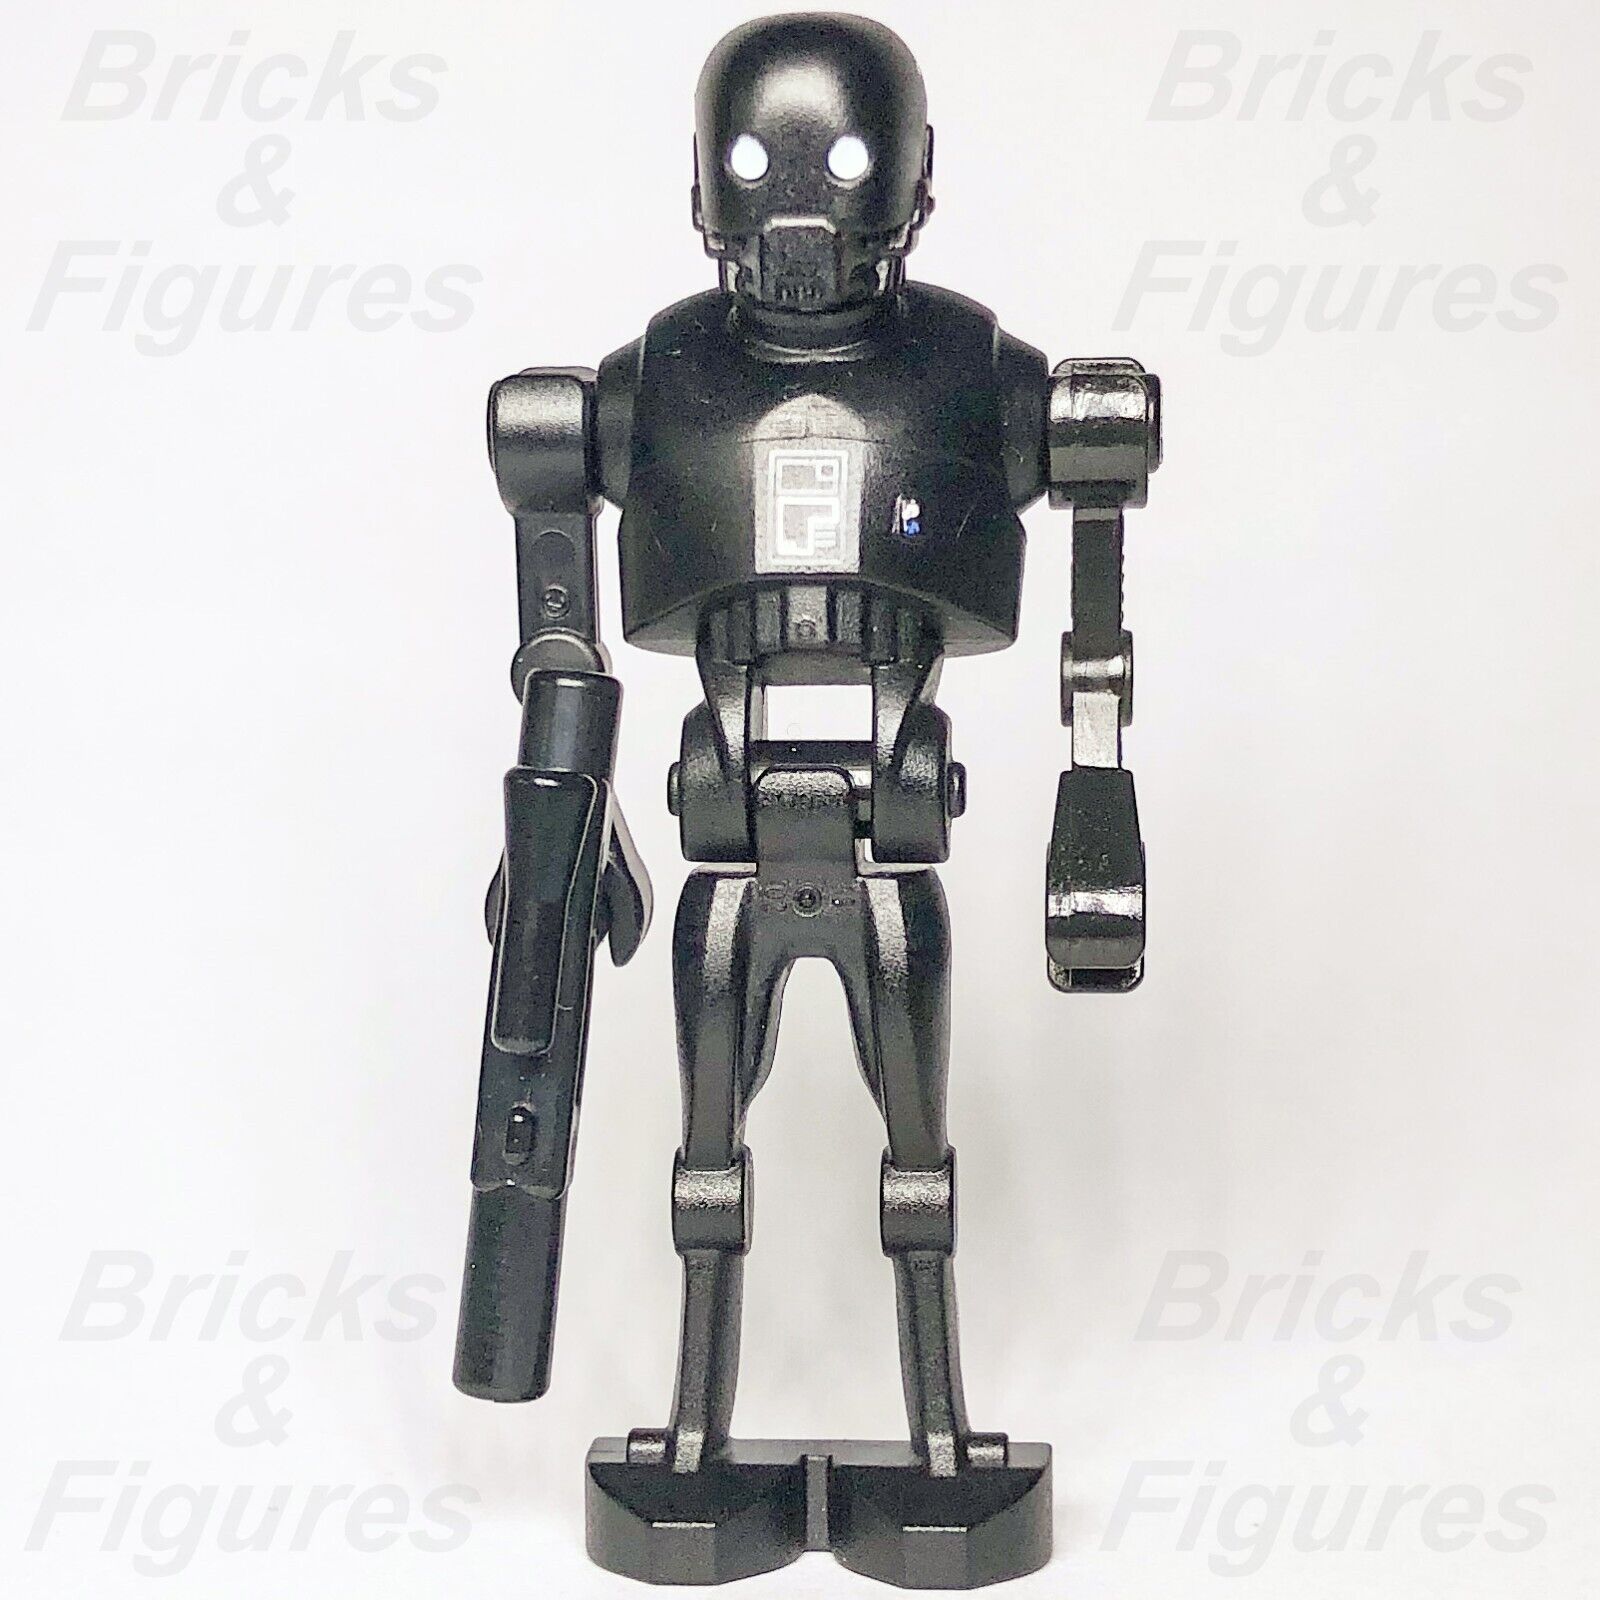 LEGO Star Wars K-2SO Security Droid Minifigure Rogue One sw0782 75156 Minifig 2